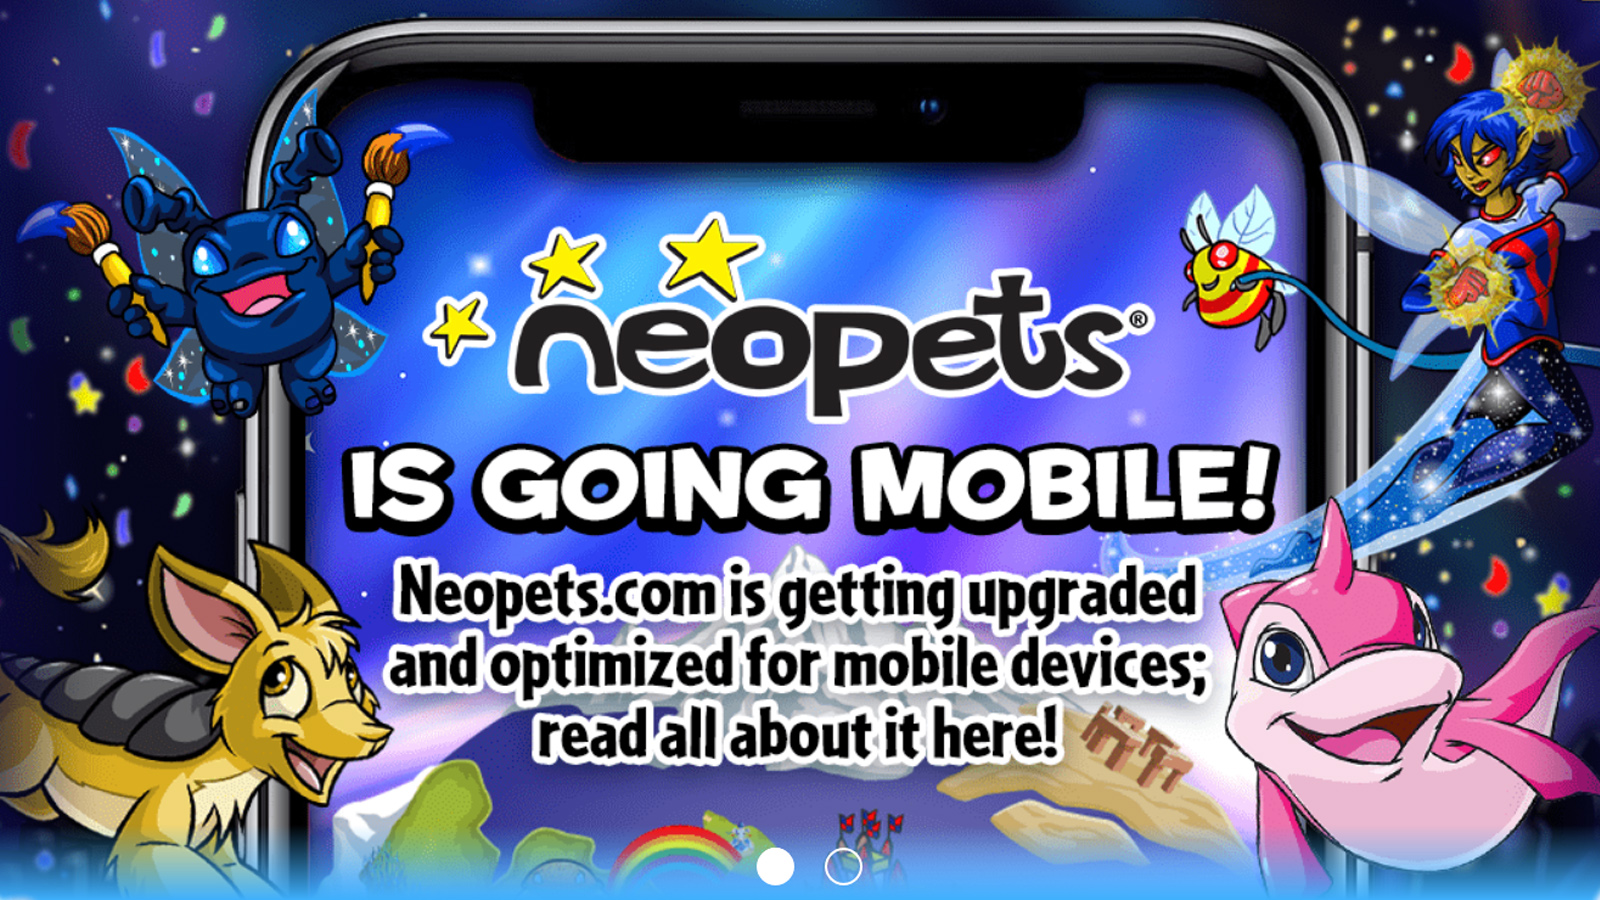 Find pricing, reviews and other details about Neopets